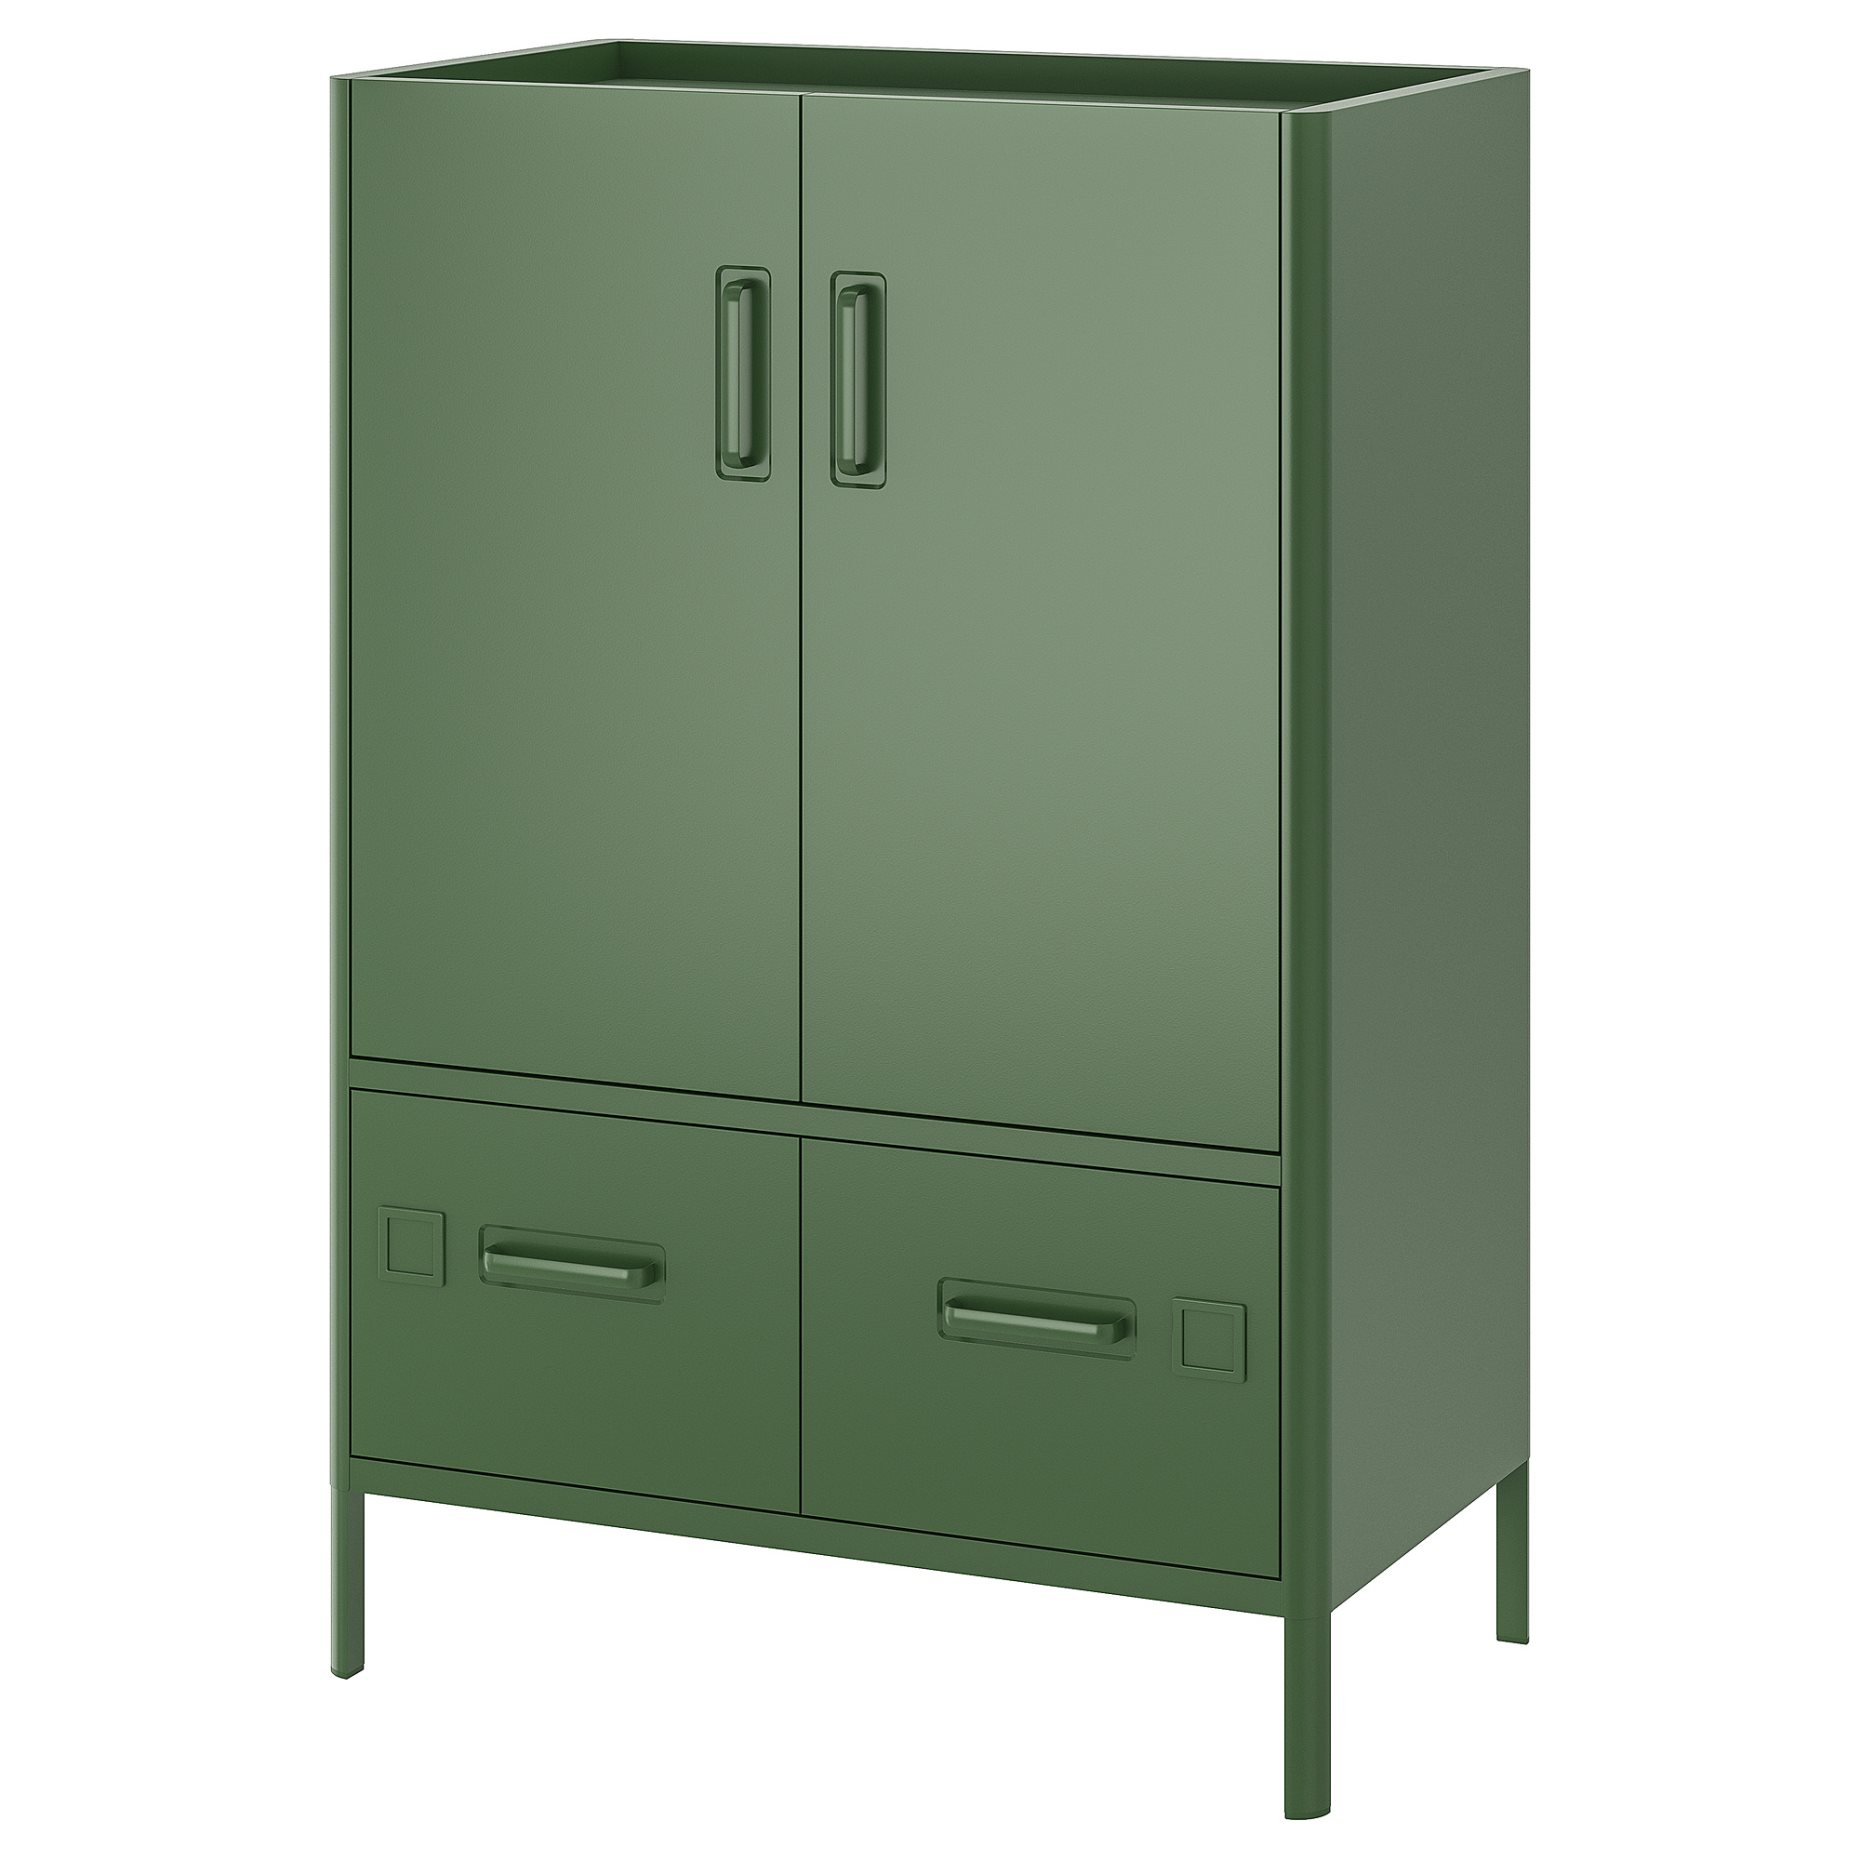 IDÅSEN, cabinet with doors and drawers, 80x47x119 cm, 904.963.98